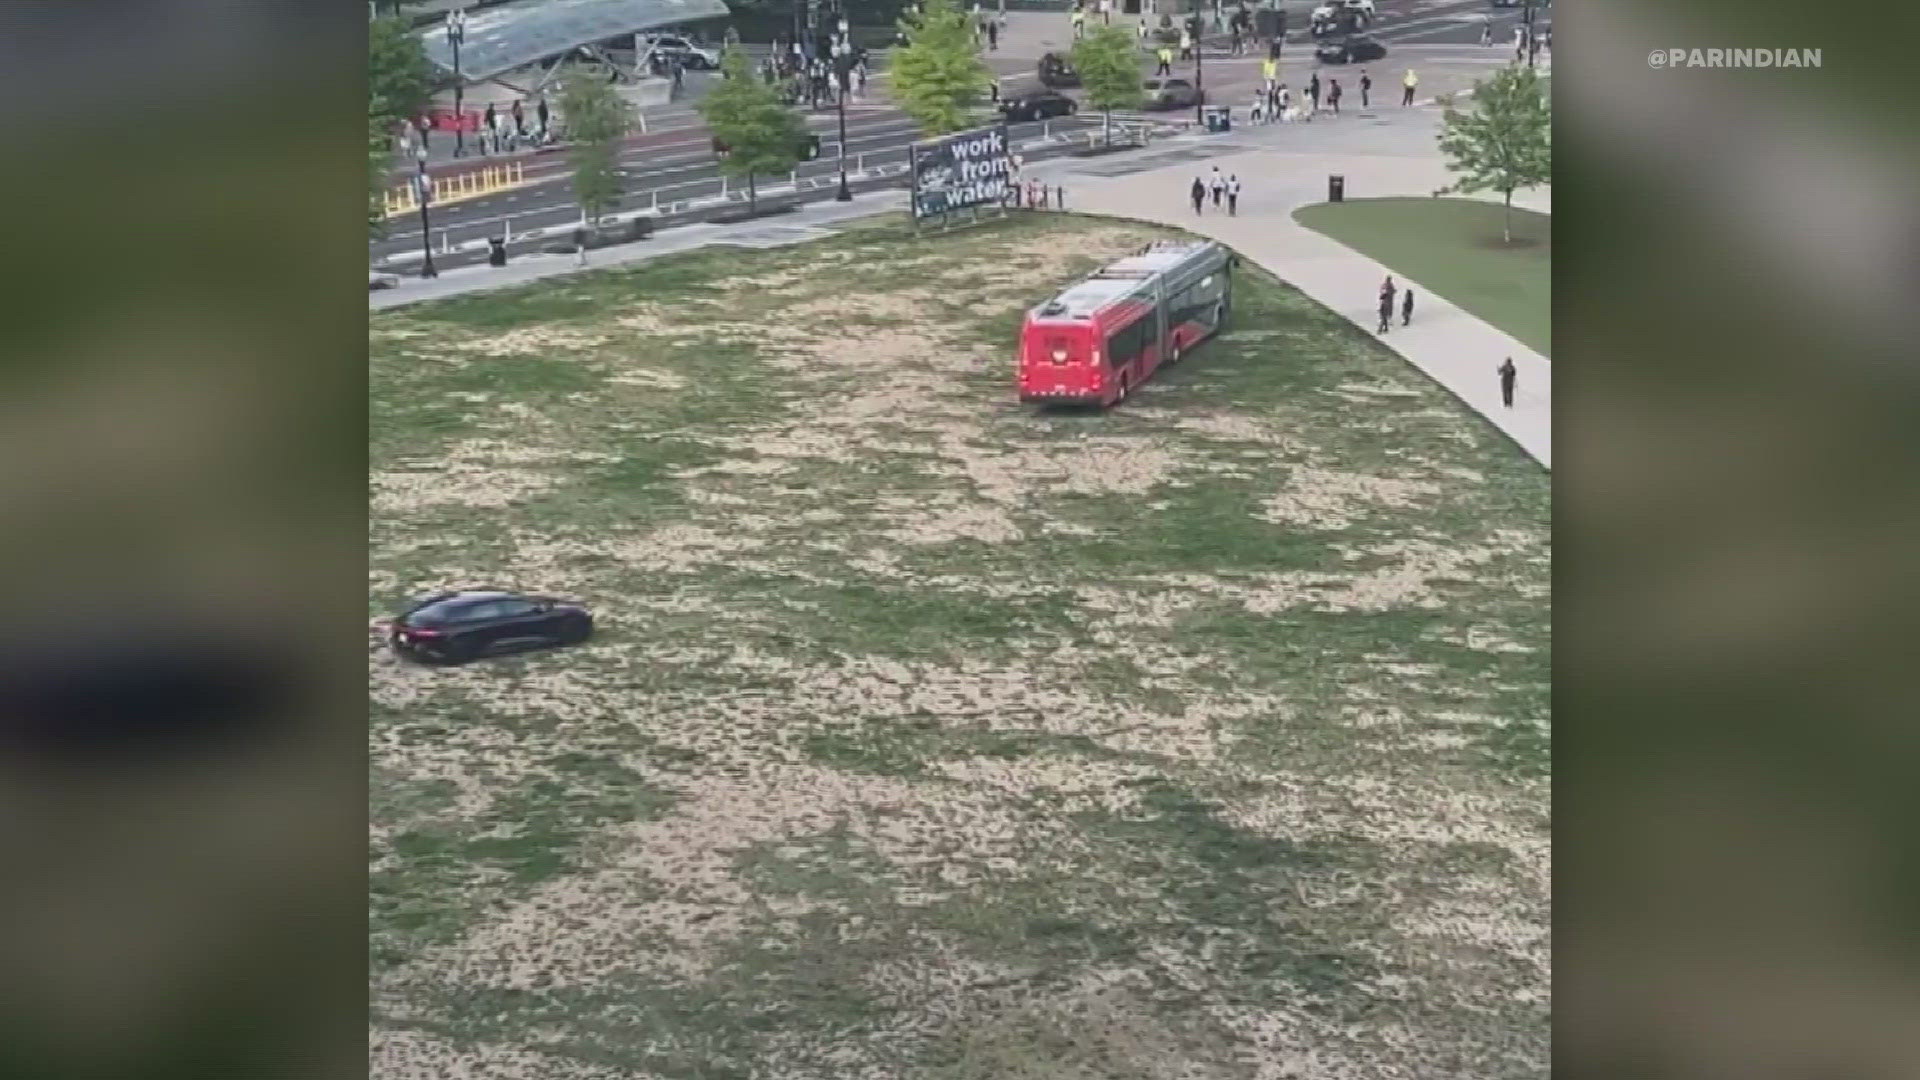 A MetroBus, driving right through one of the green spaces in Navy Yard. WMATA officials say, they said it was fine.